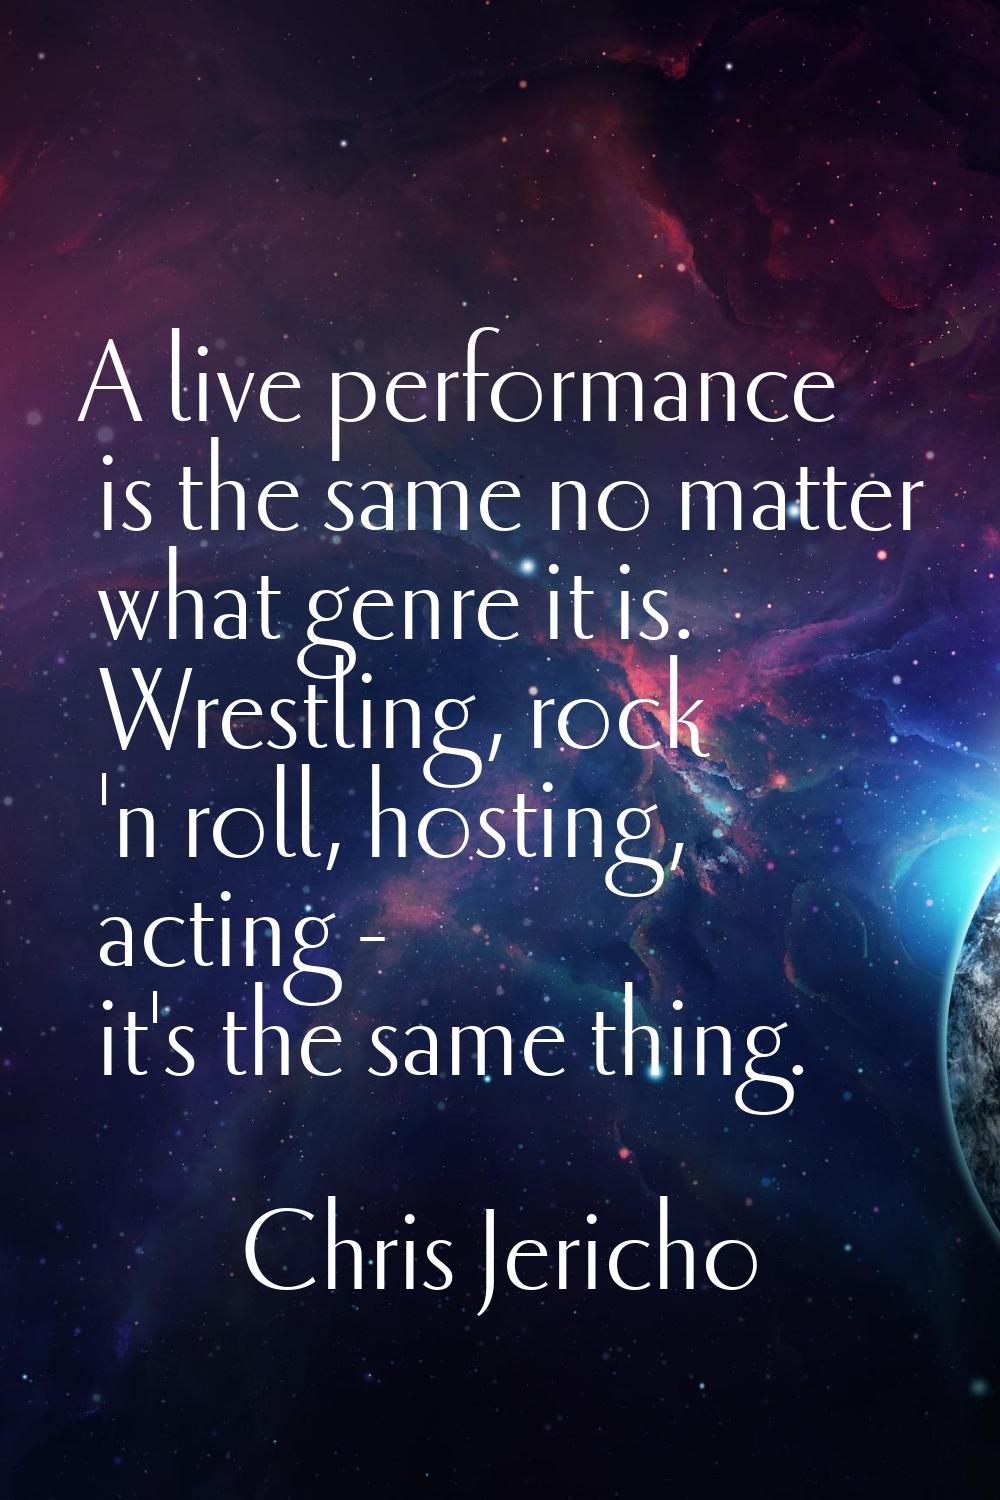 A live performance is the same no matter what genre it is. Wrestling, rock 'n roll, hosting, acting